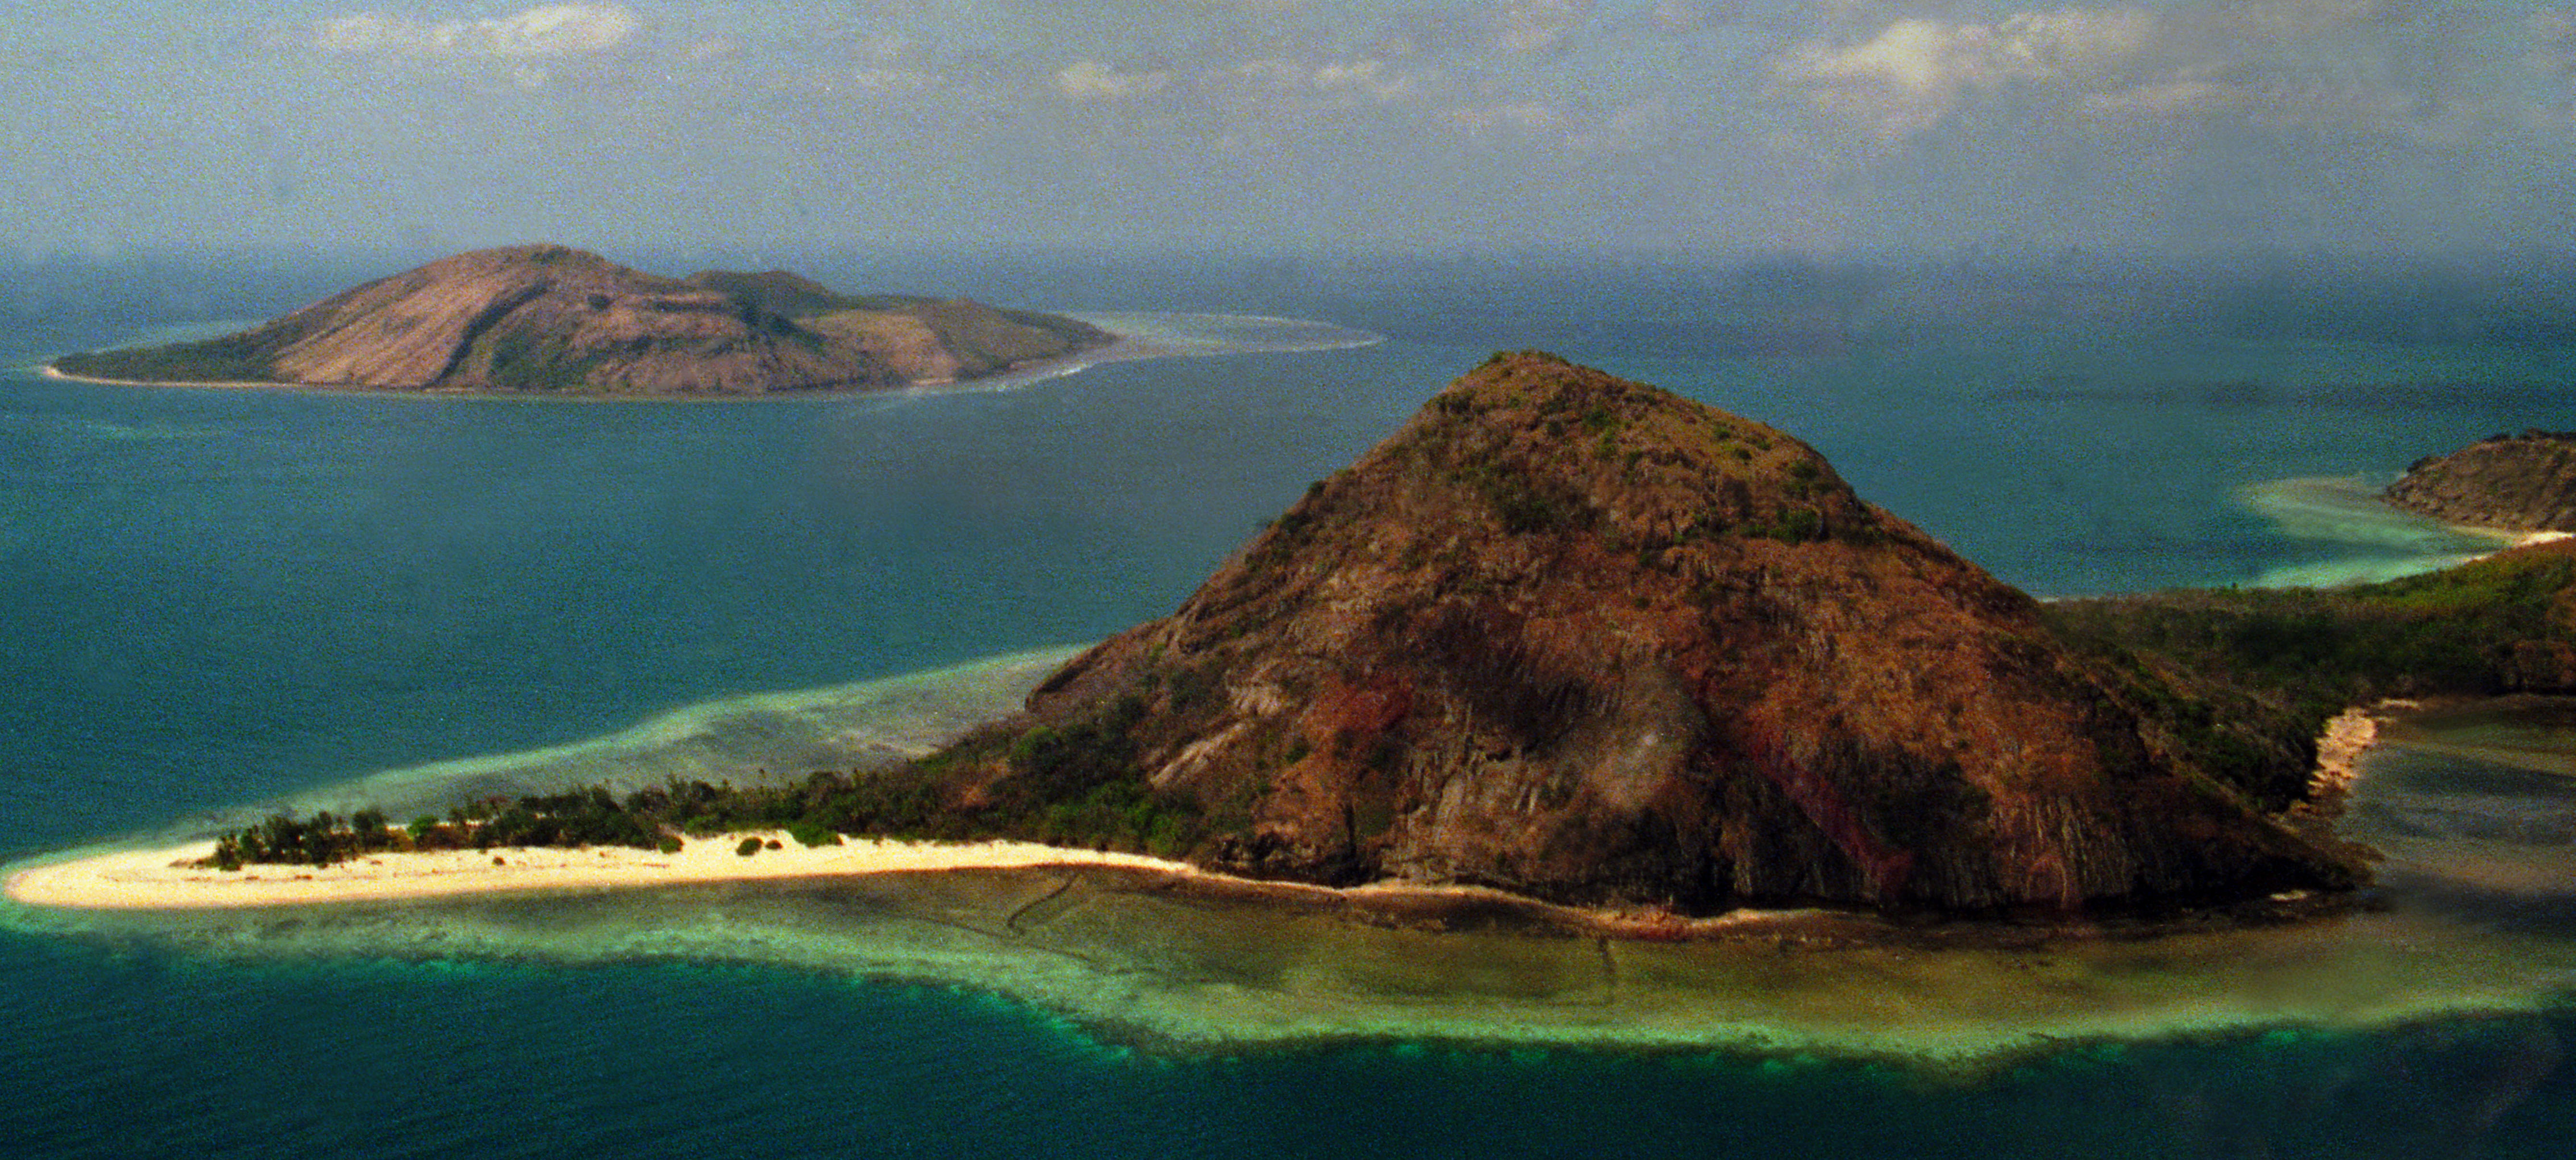 Photo of the Dauar and Murray Islands by Trevor Graham, May 1989, Yarrabank Film.